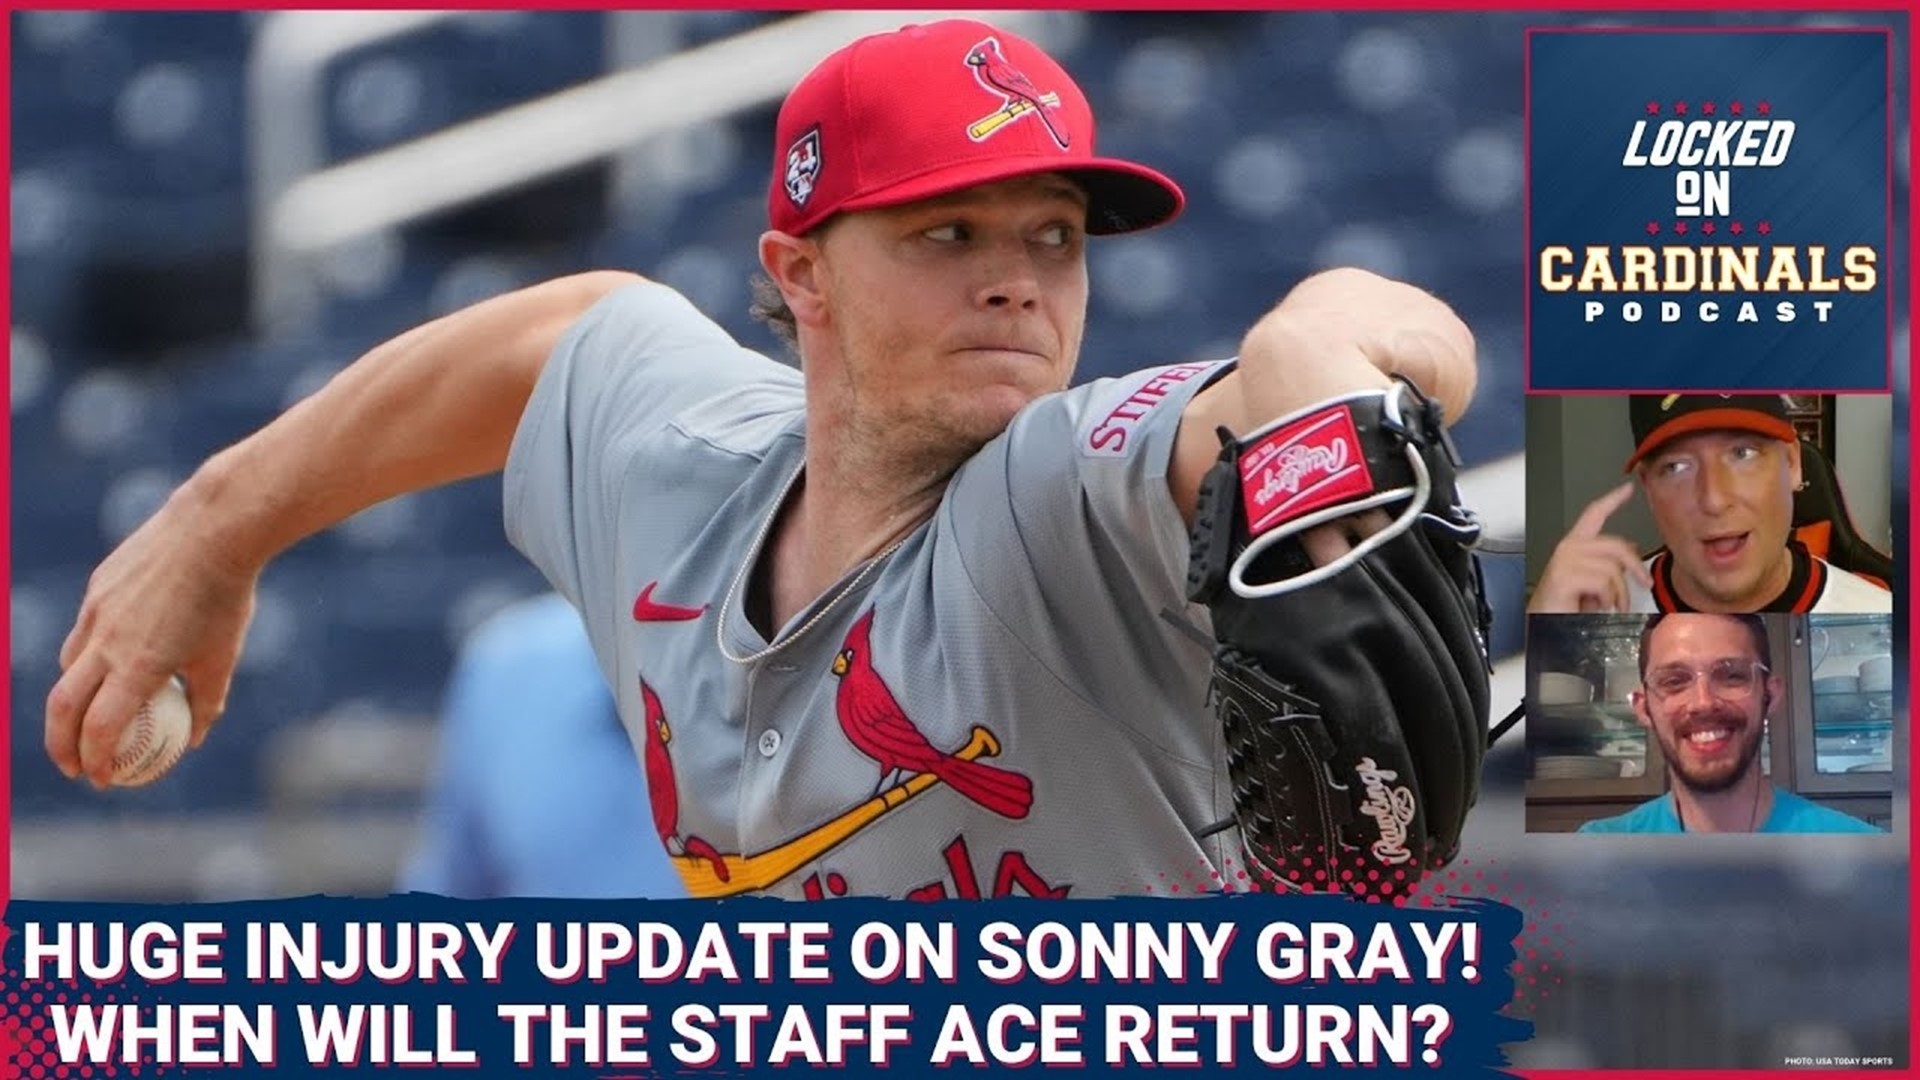 Sonny Gray Return Date! The Good, Bad, And Ugly Of 2024, Plus A Look Into The Arm Injuries in MLB